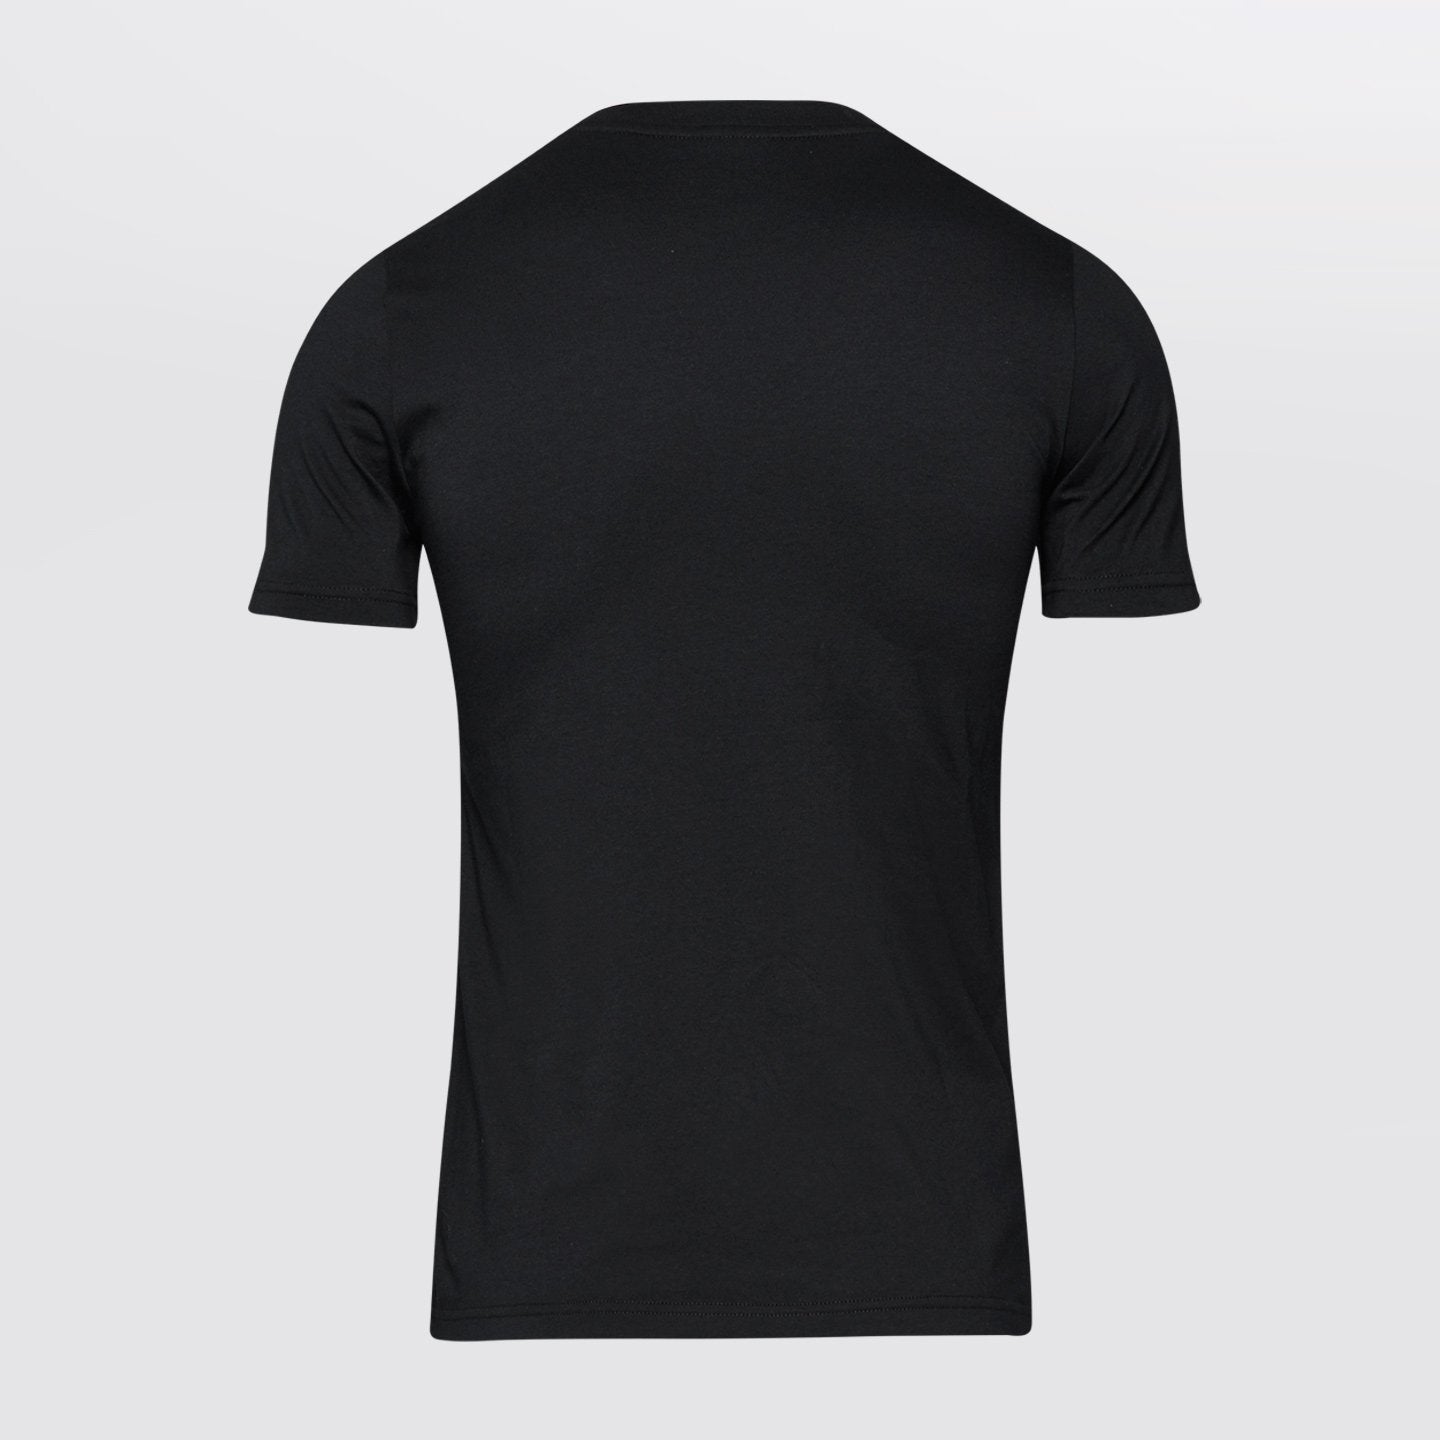 Concave T-Shirt - Black/White/Red